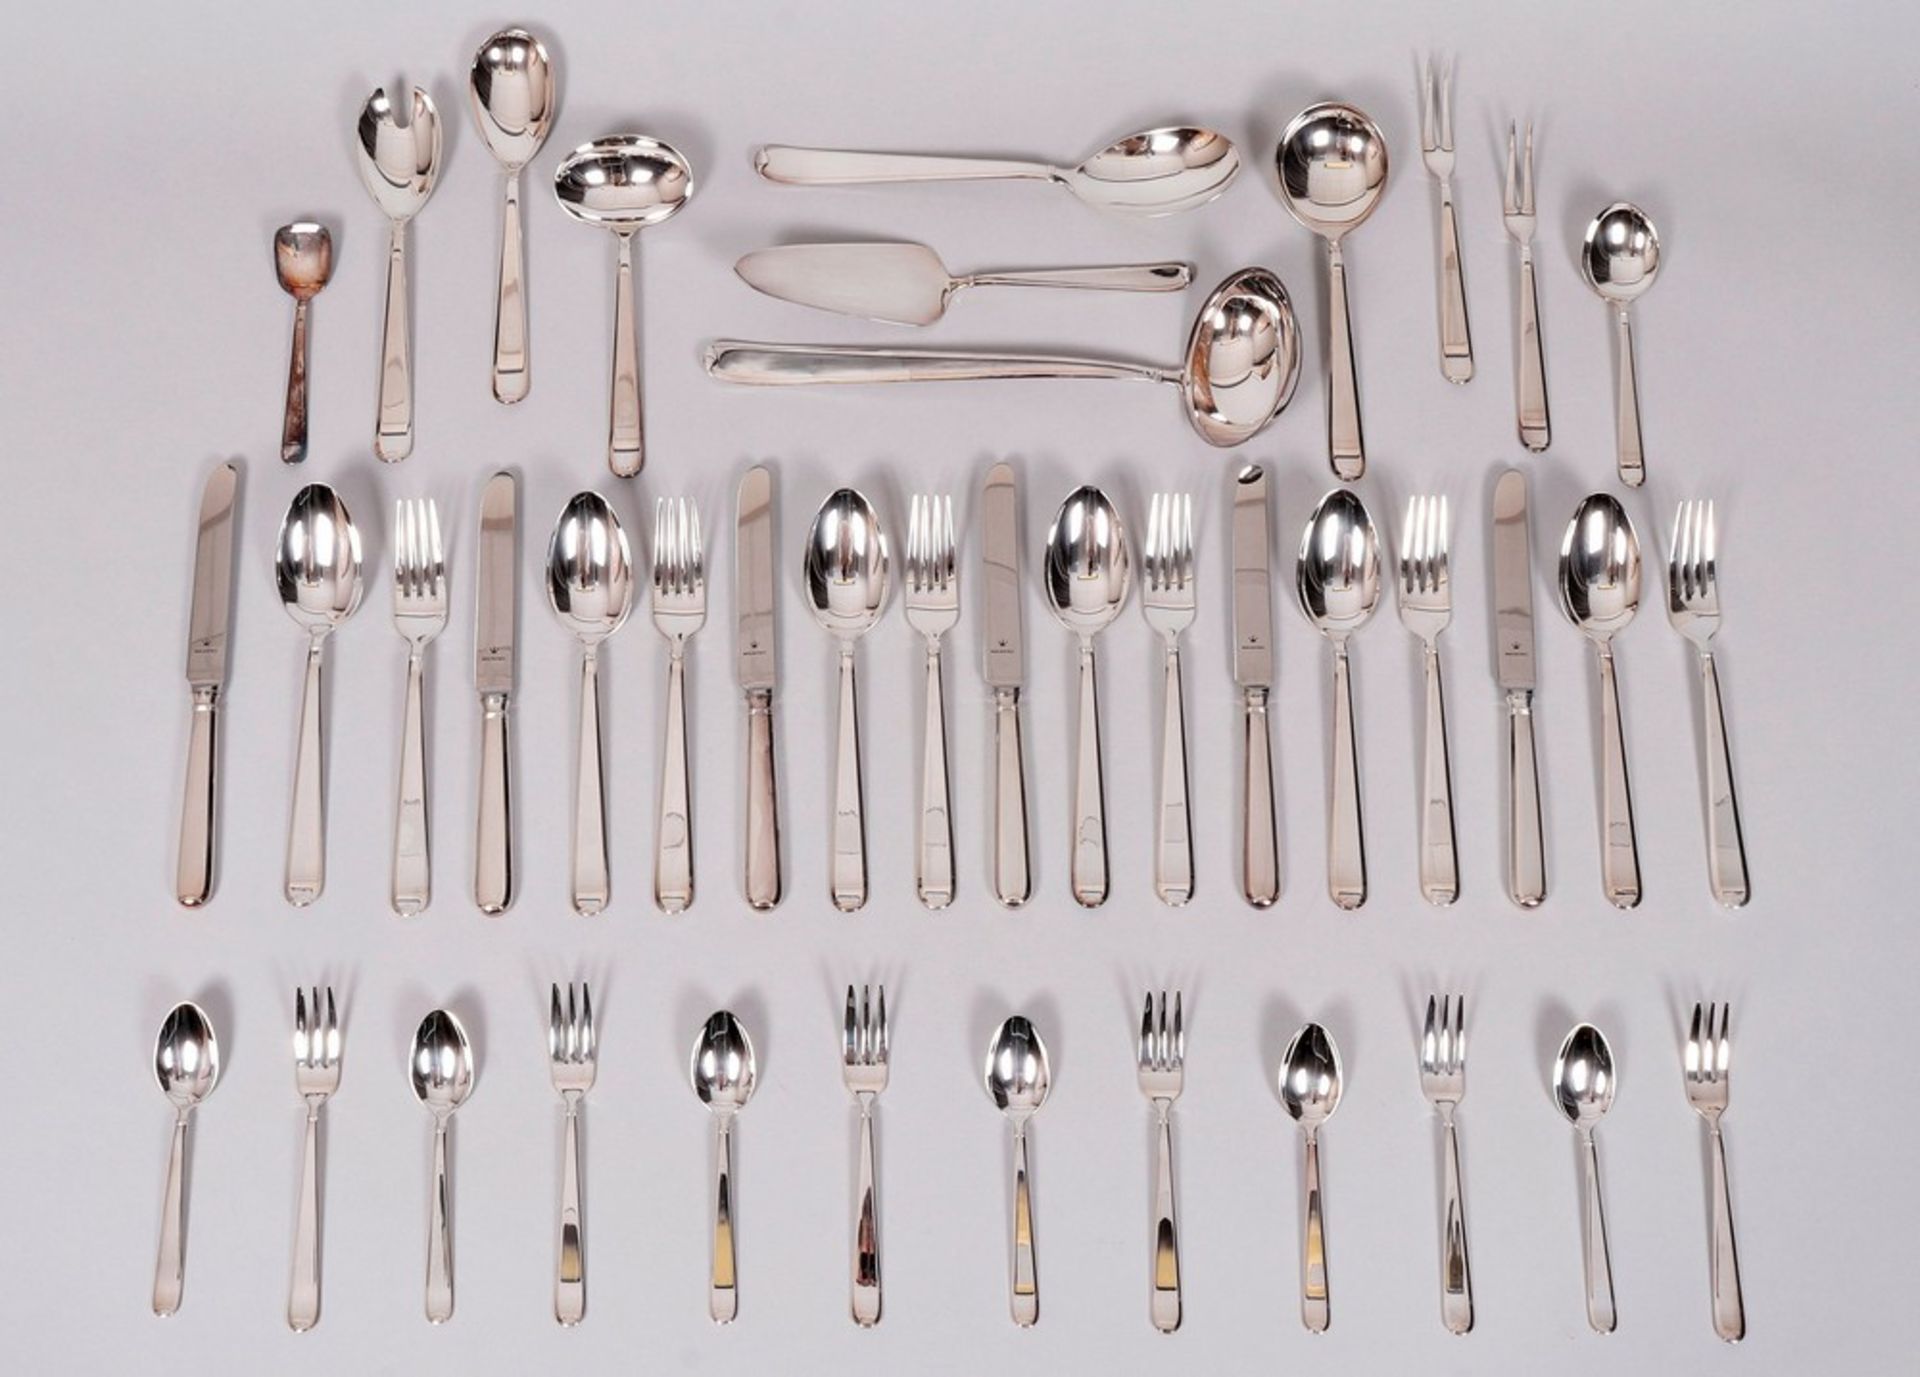 Cutlery set for 6 persons, 800 silver, Wilkens, 20th C., 41 pcs.